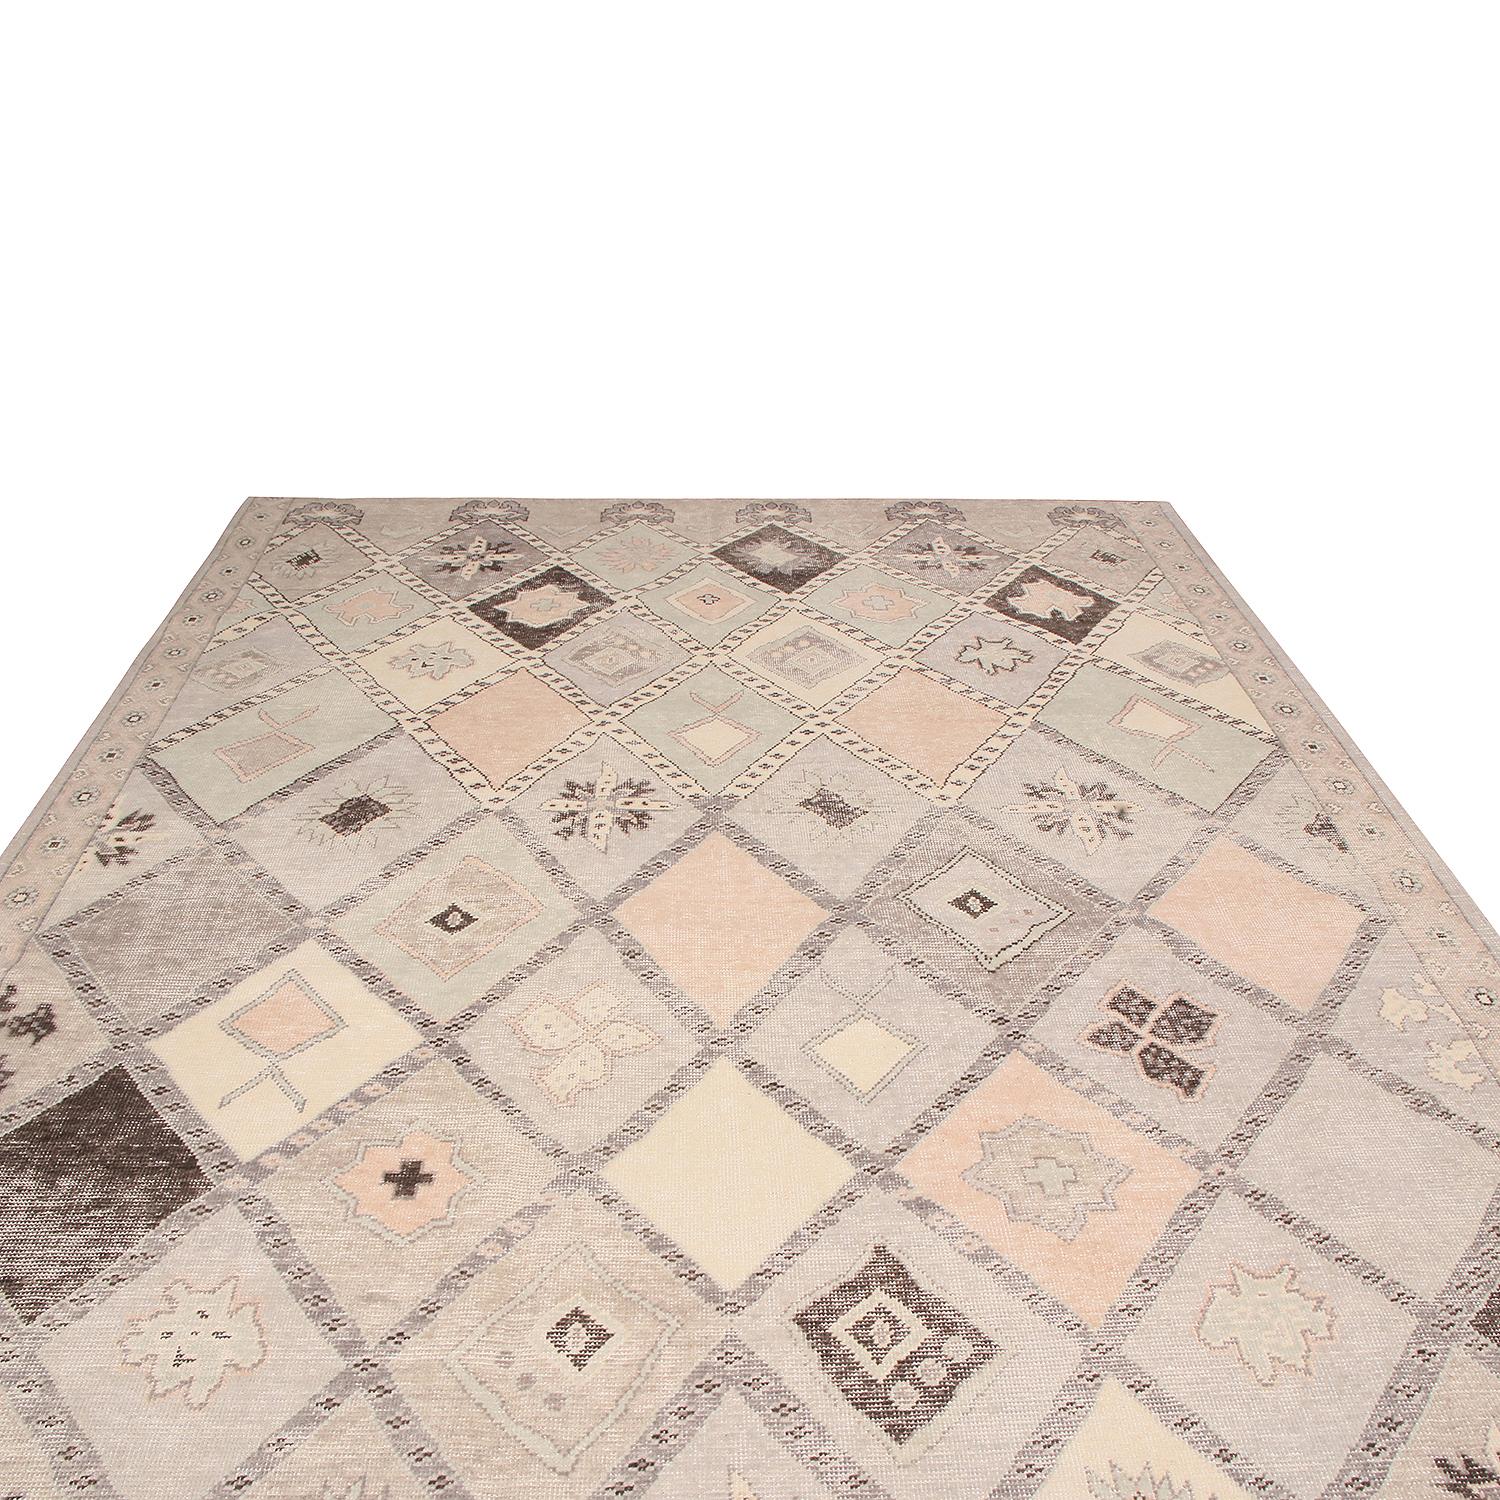 Hand knotted in high-quality wool originating from India, this geometric-floral rug is the latest addition to Rug & Kilim’s Homage collection, enjoying a finer take on distressed shabby chic aesthetic with fewer knots per square inch. The diamond